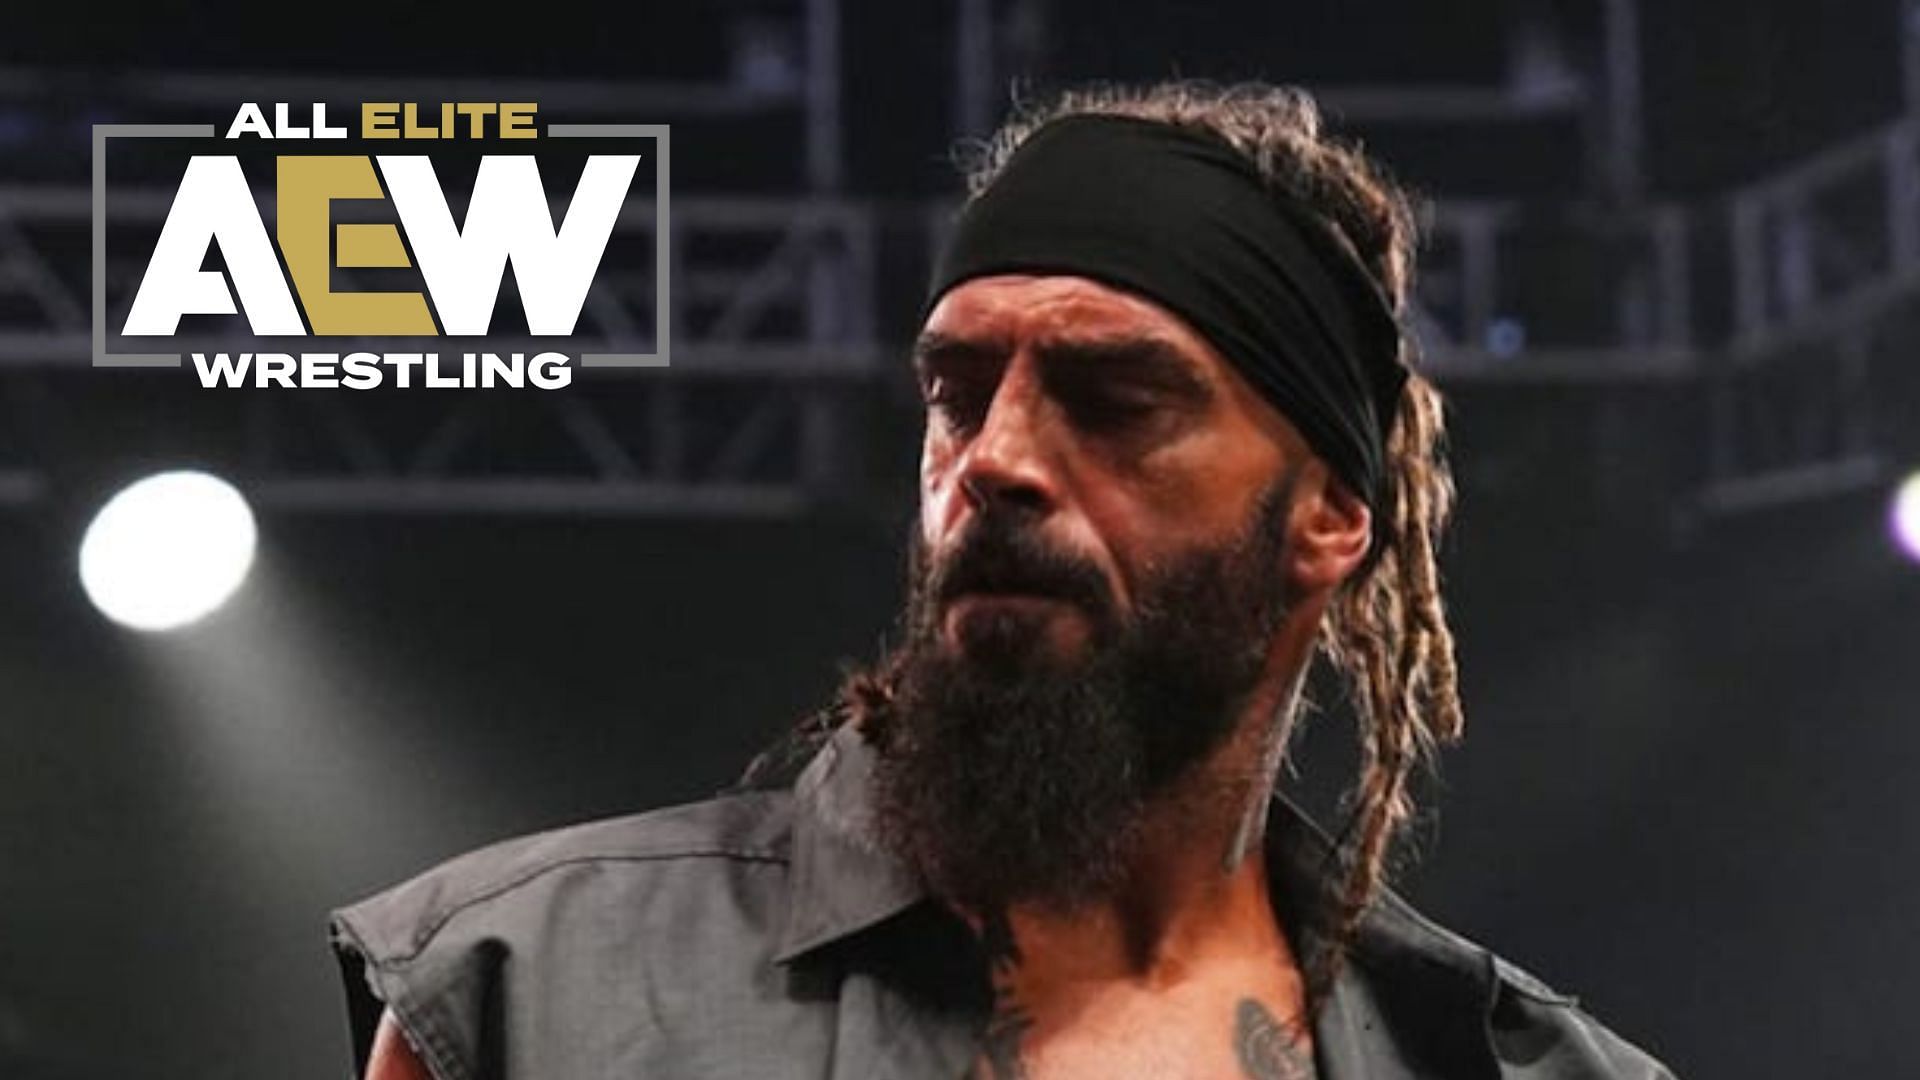 Jay Briscoe passed away at the age of 38